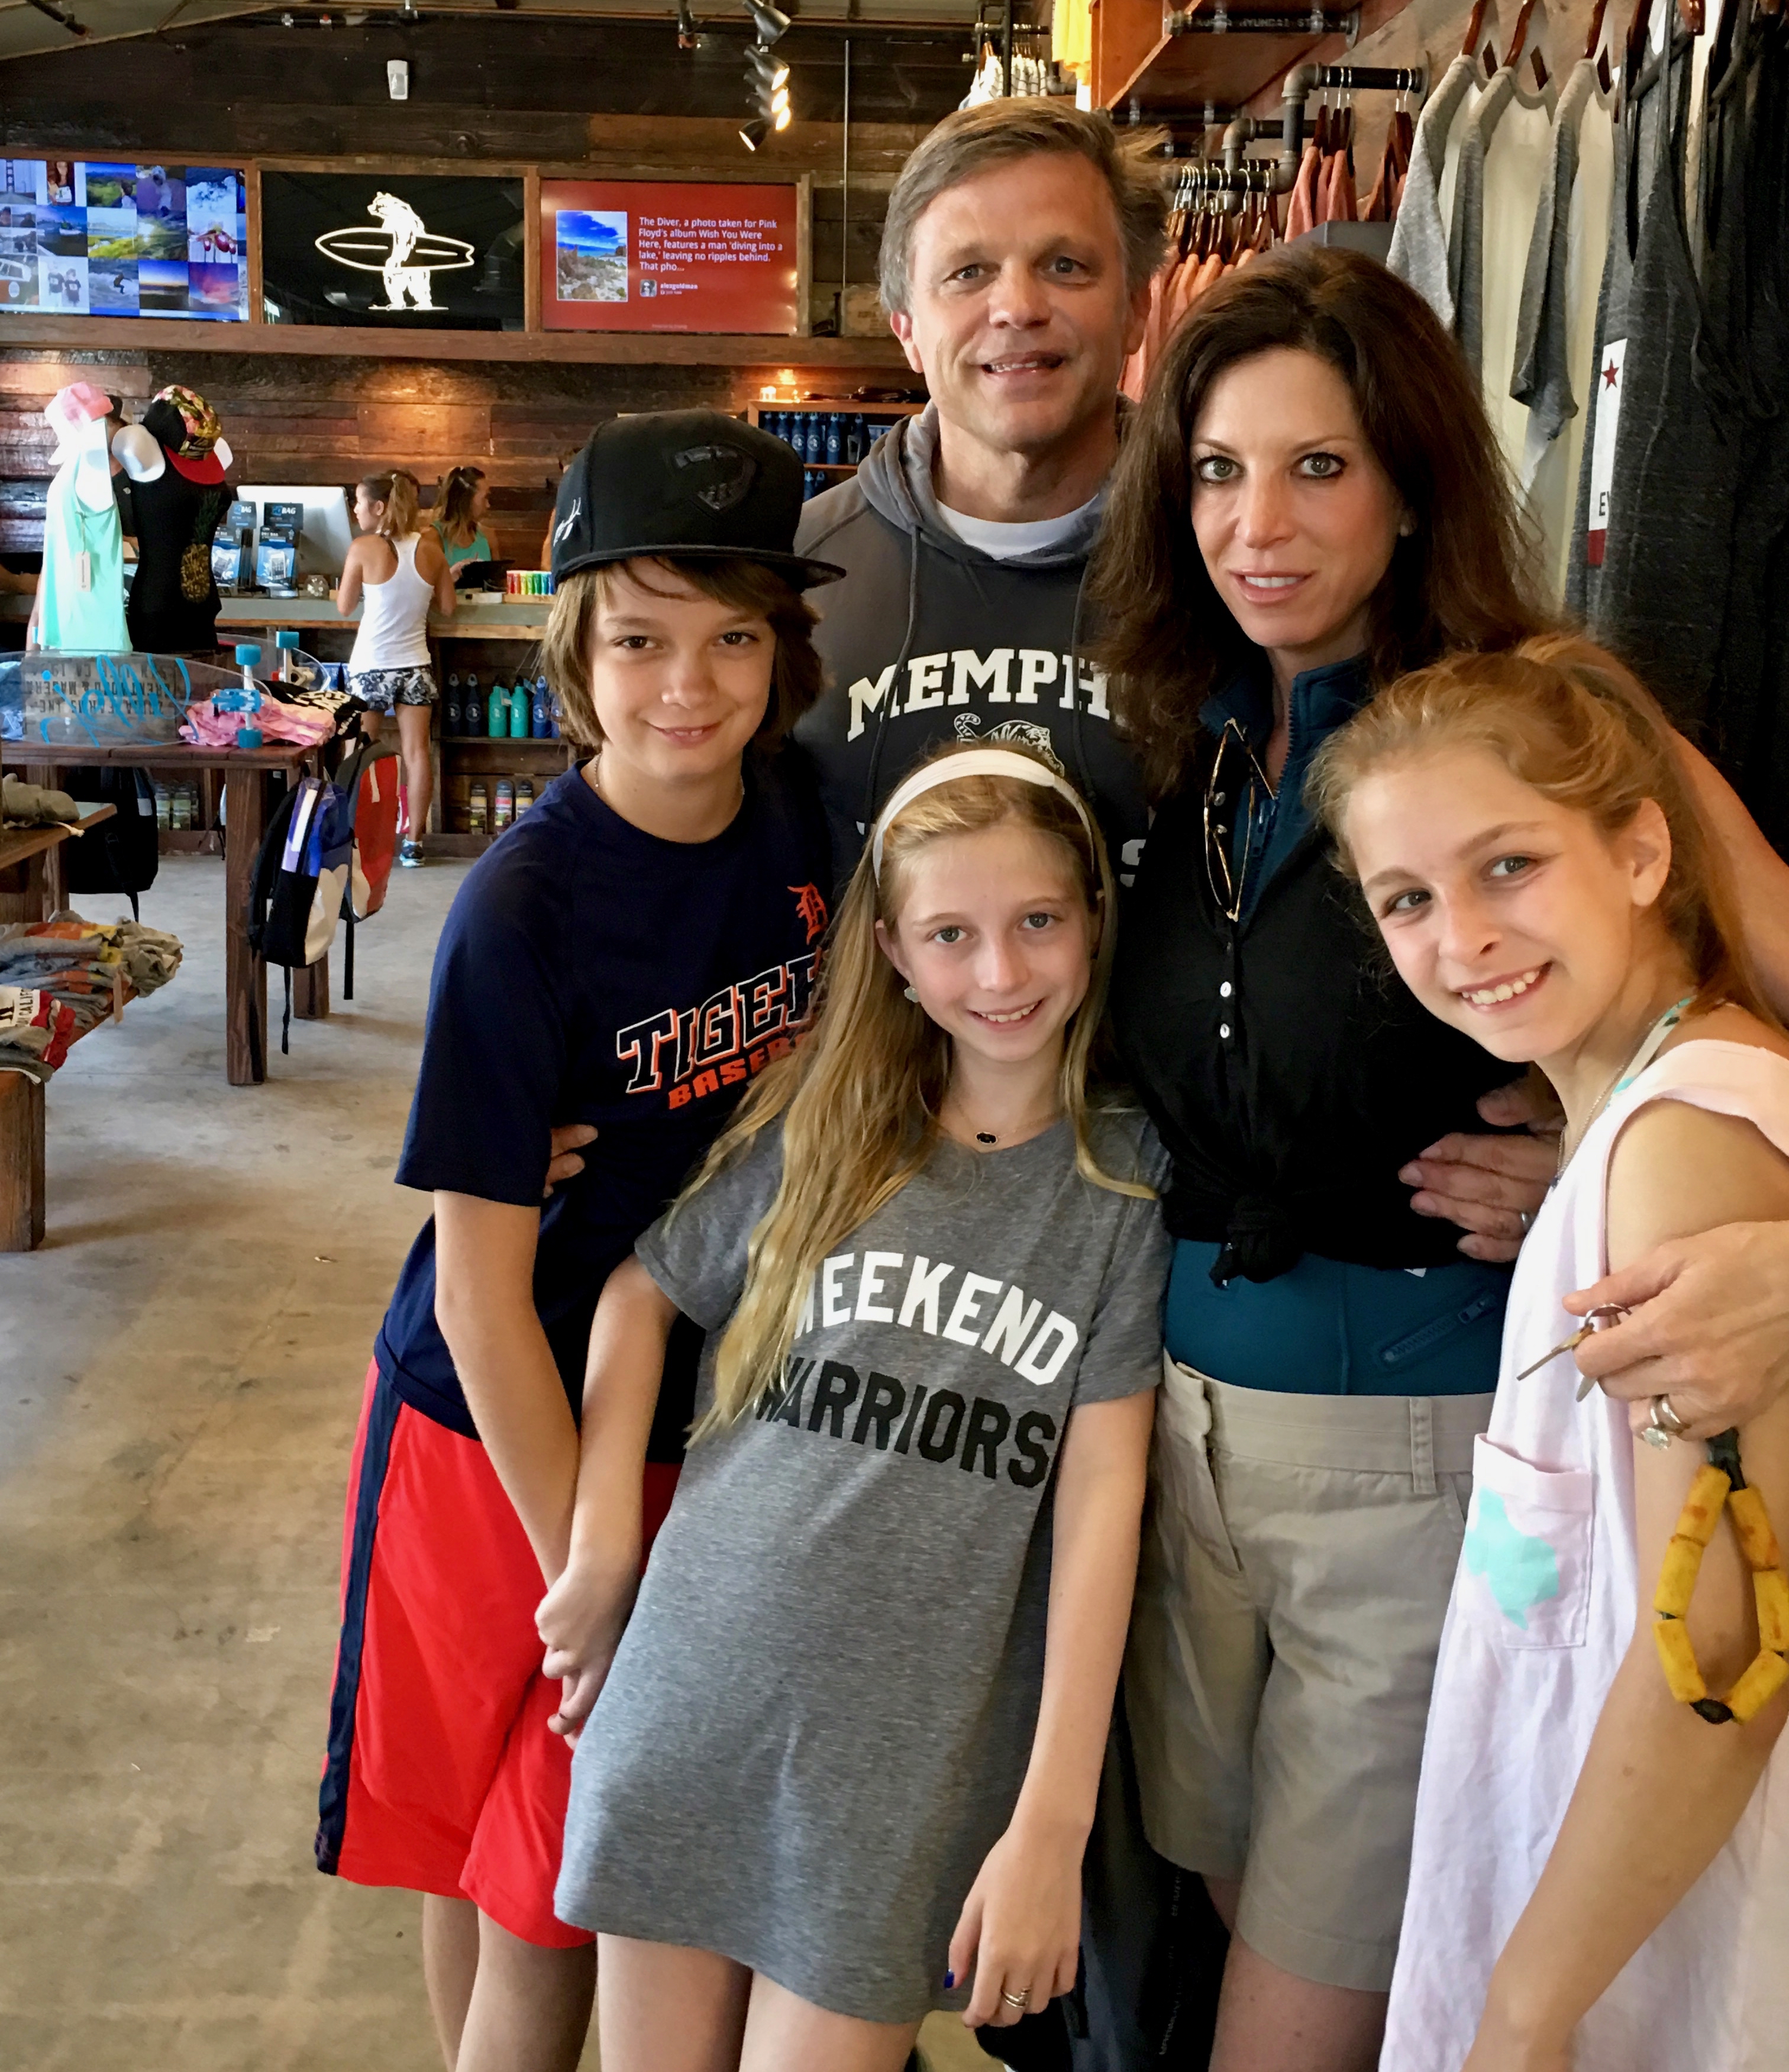 Douglas Brinkley and his family